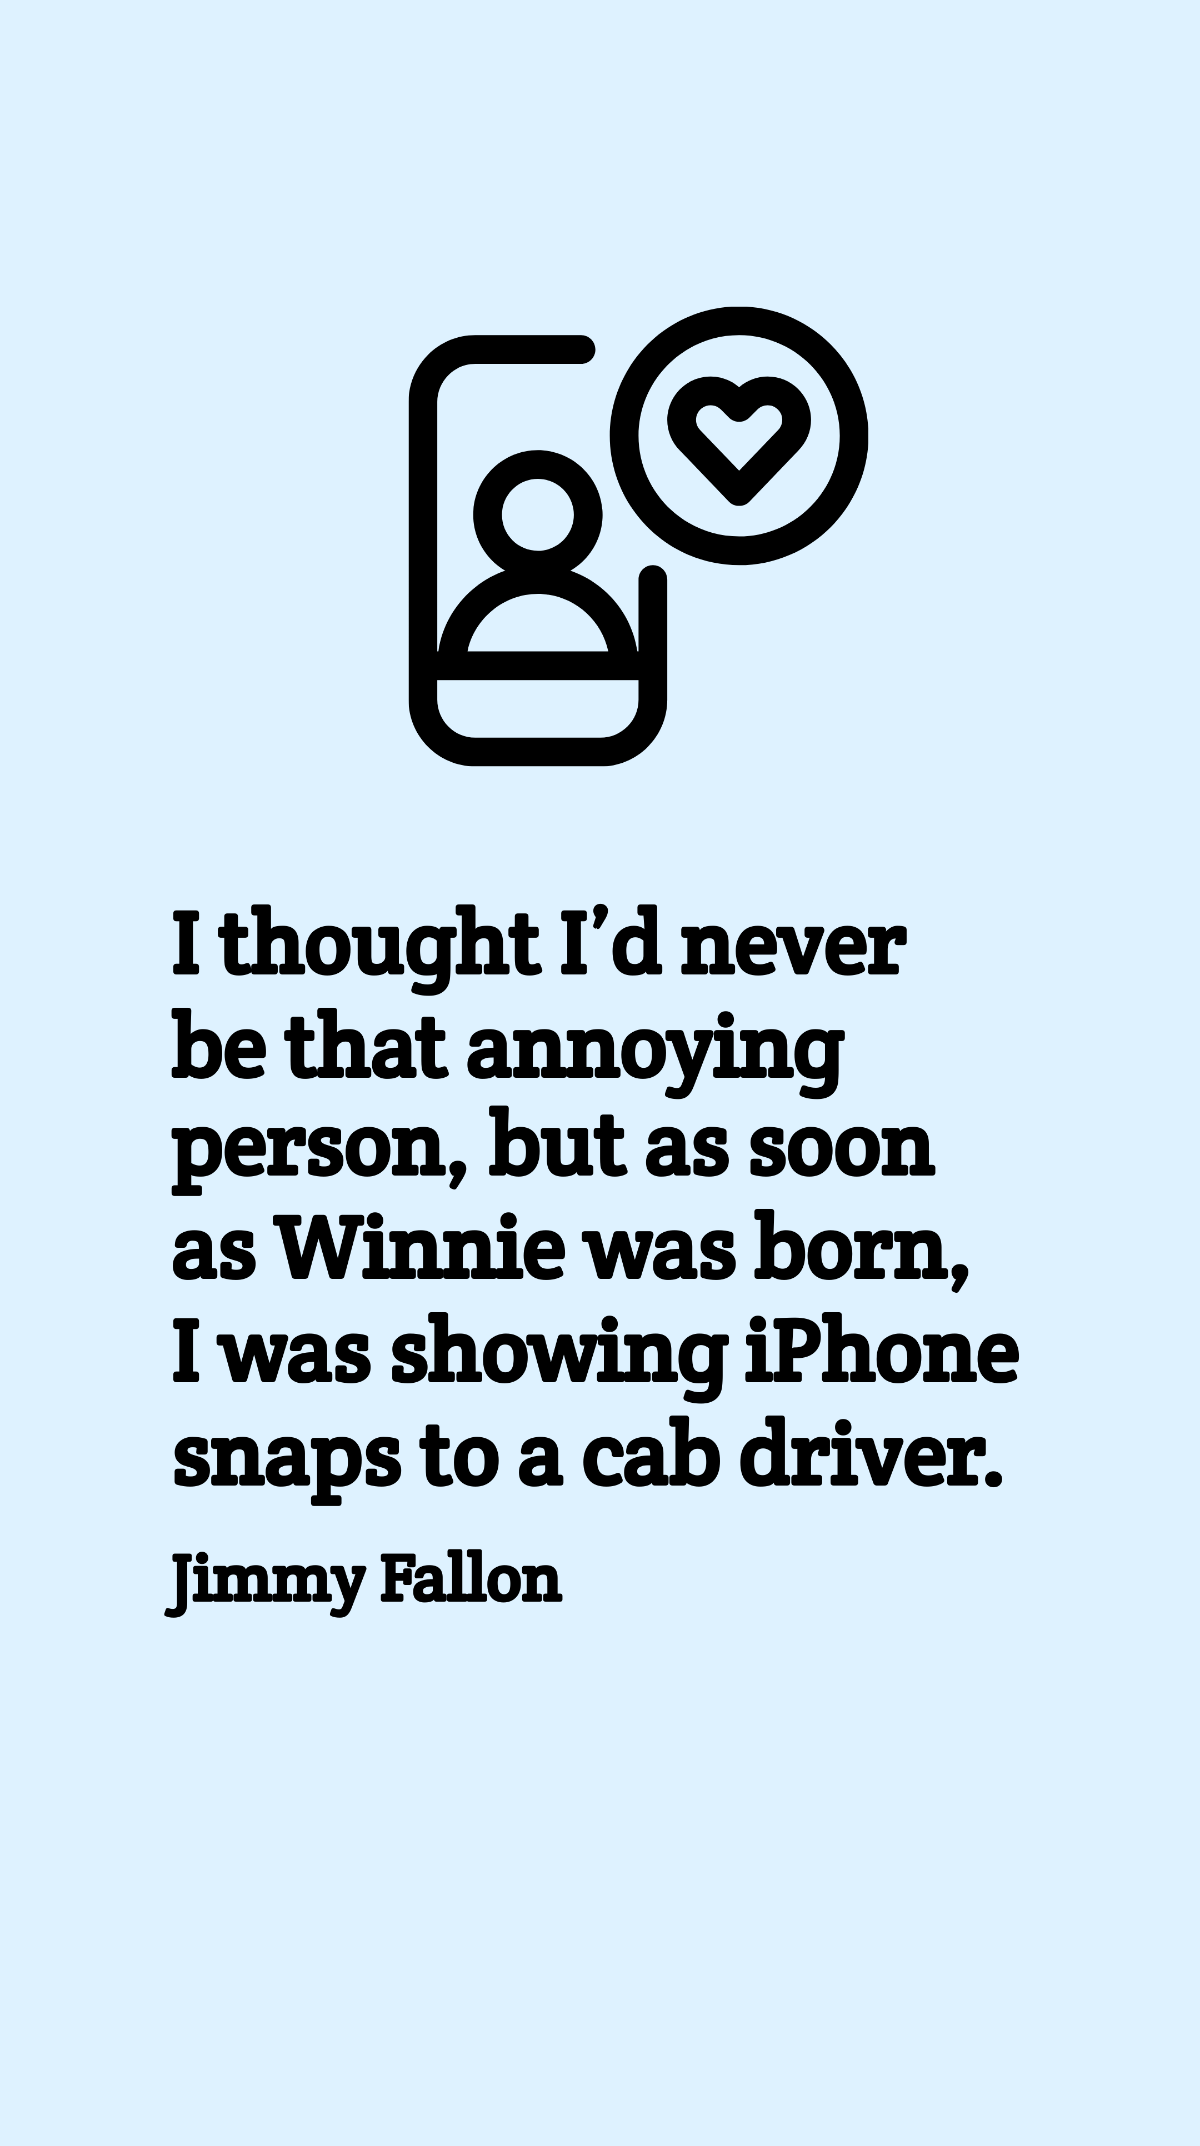 Jimmy Fallon - I thought I’d never be that annoying person, but as soon as Winnie was born, I was showing iPhone snaps to a cab driver. Template